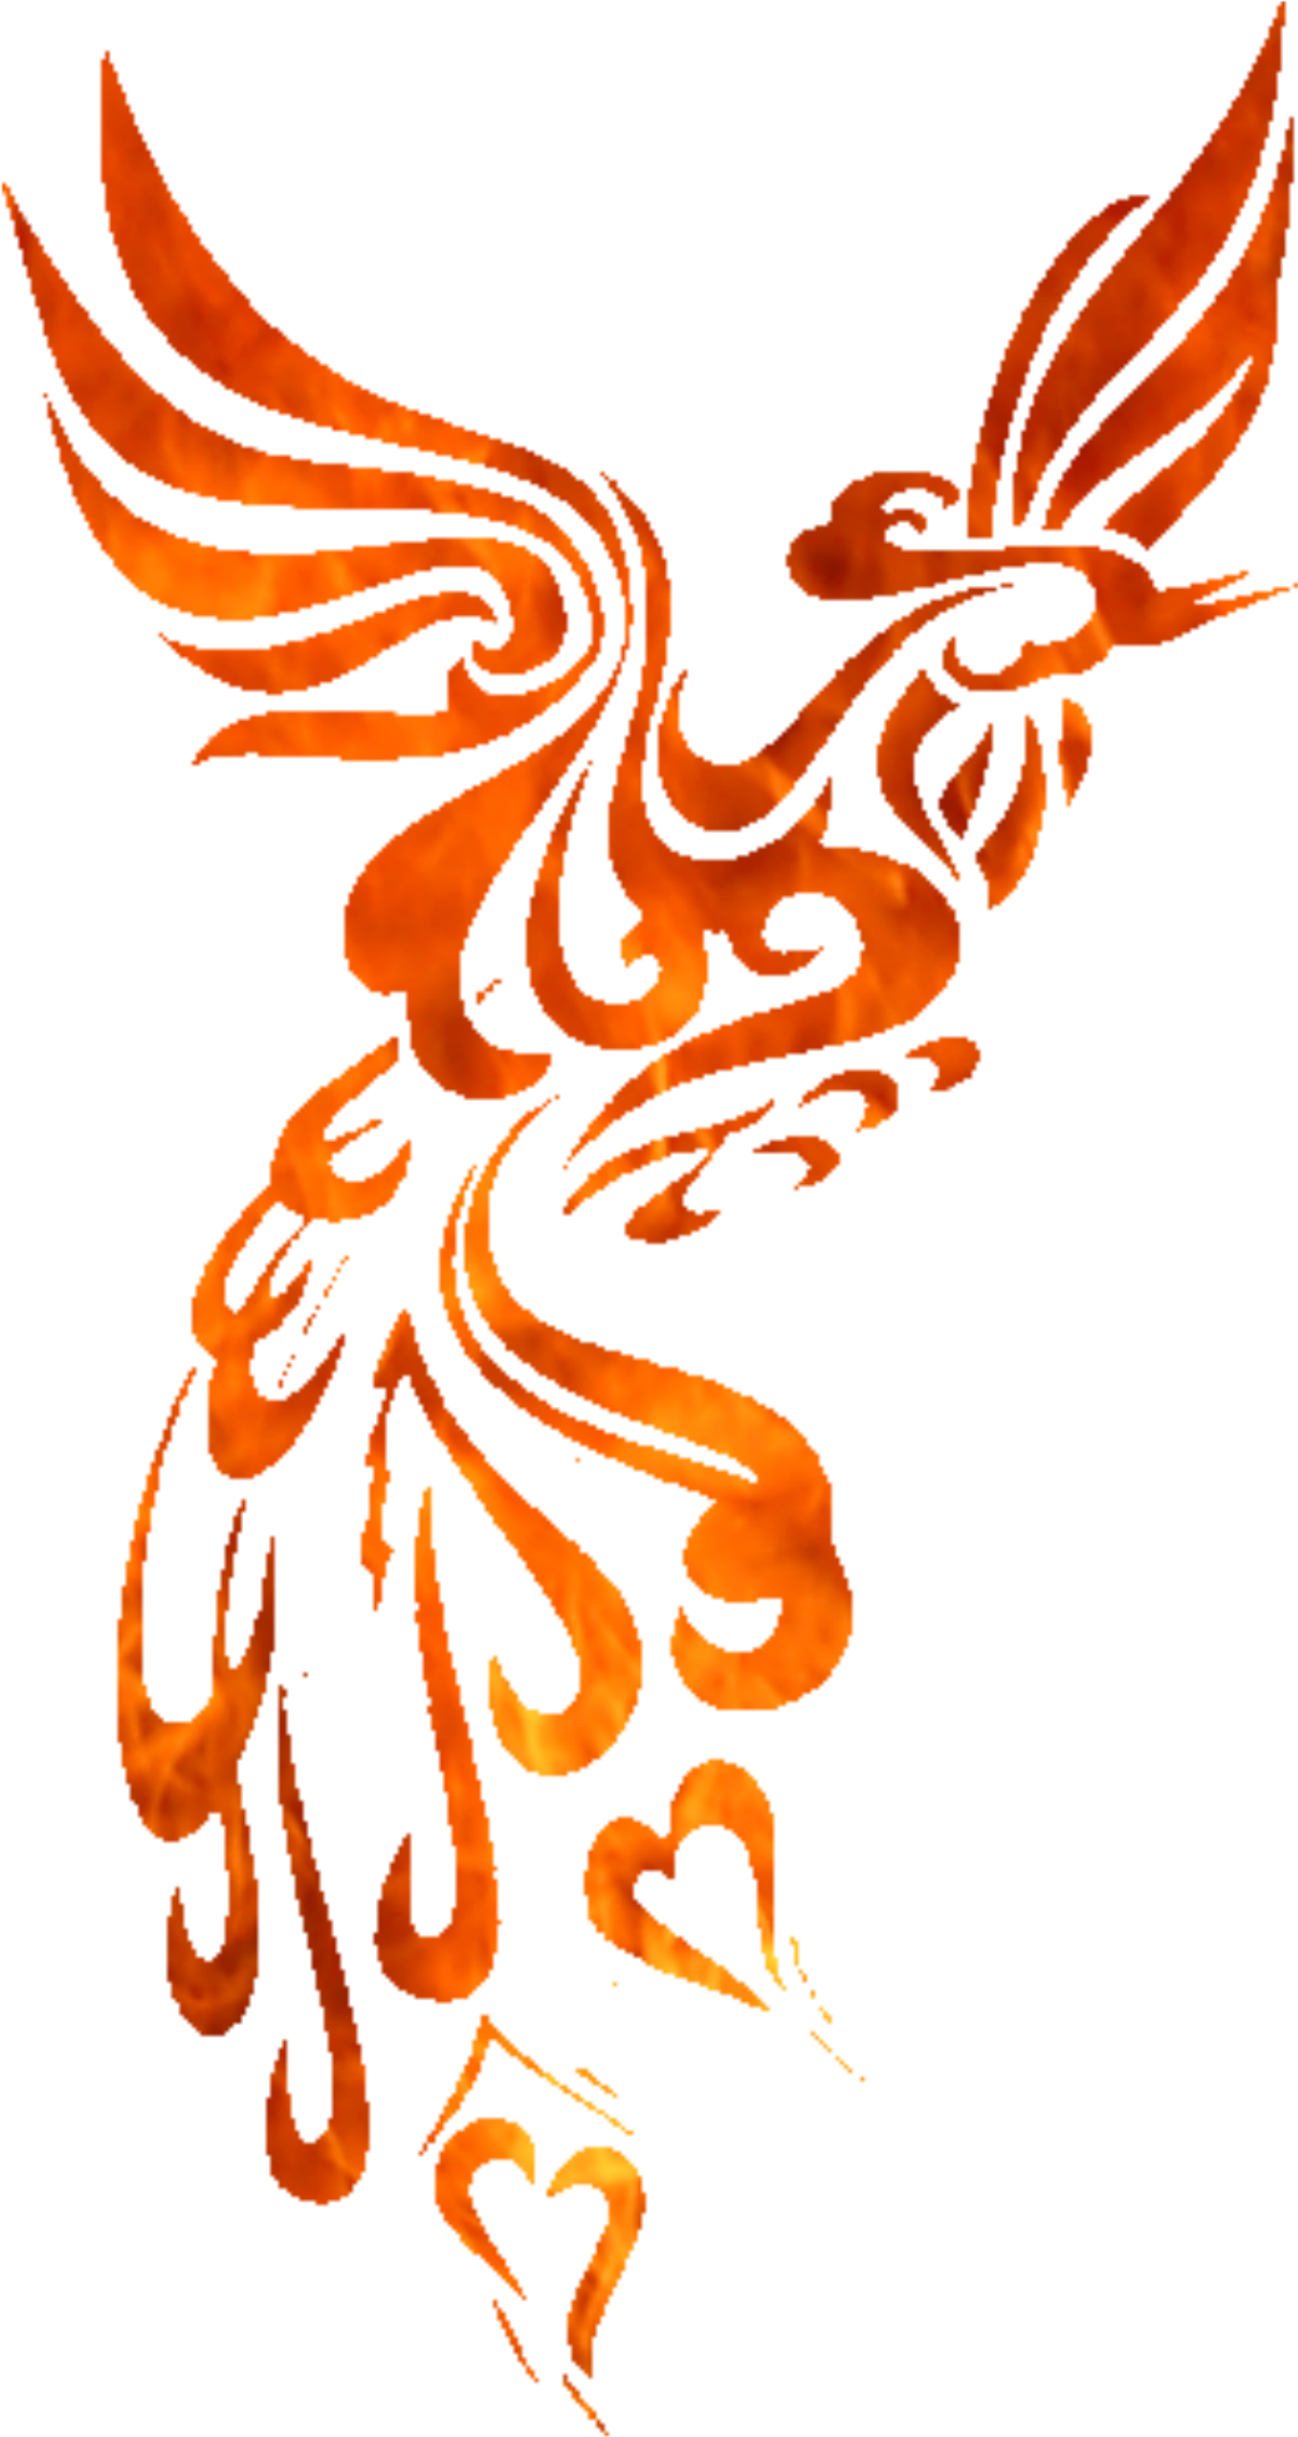 A Fire Bird With A Black Background